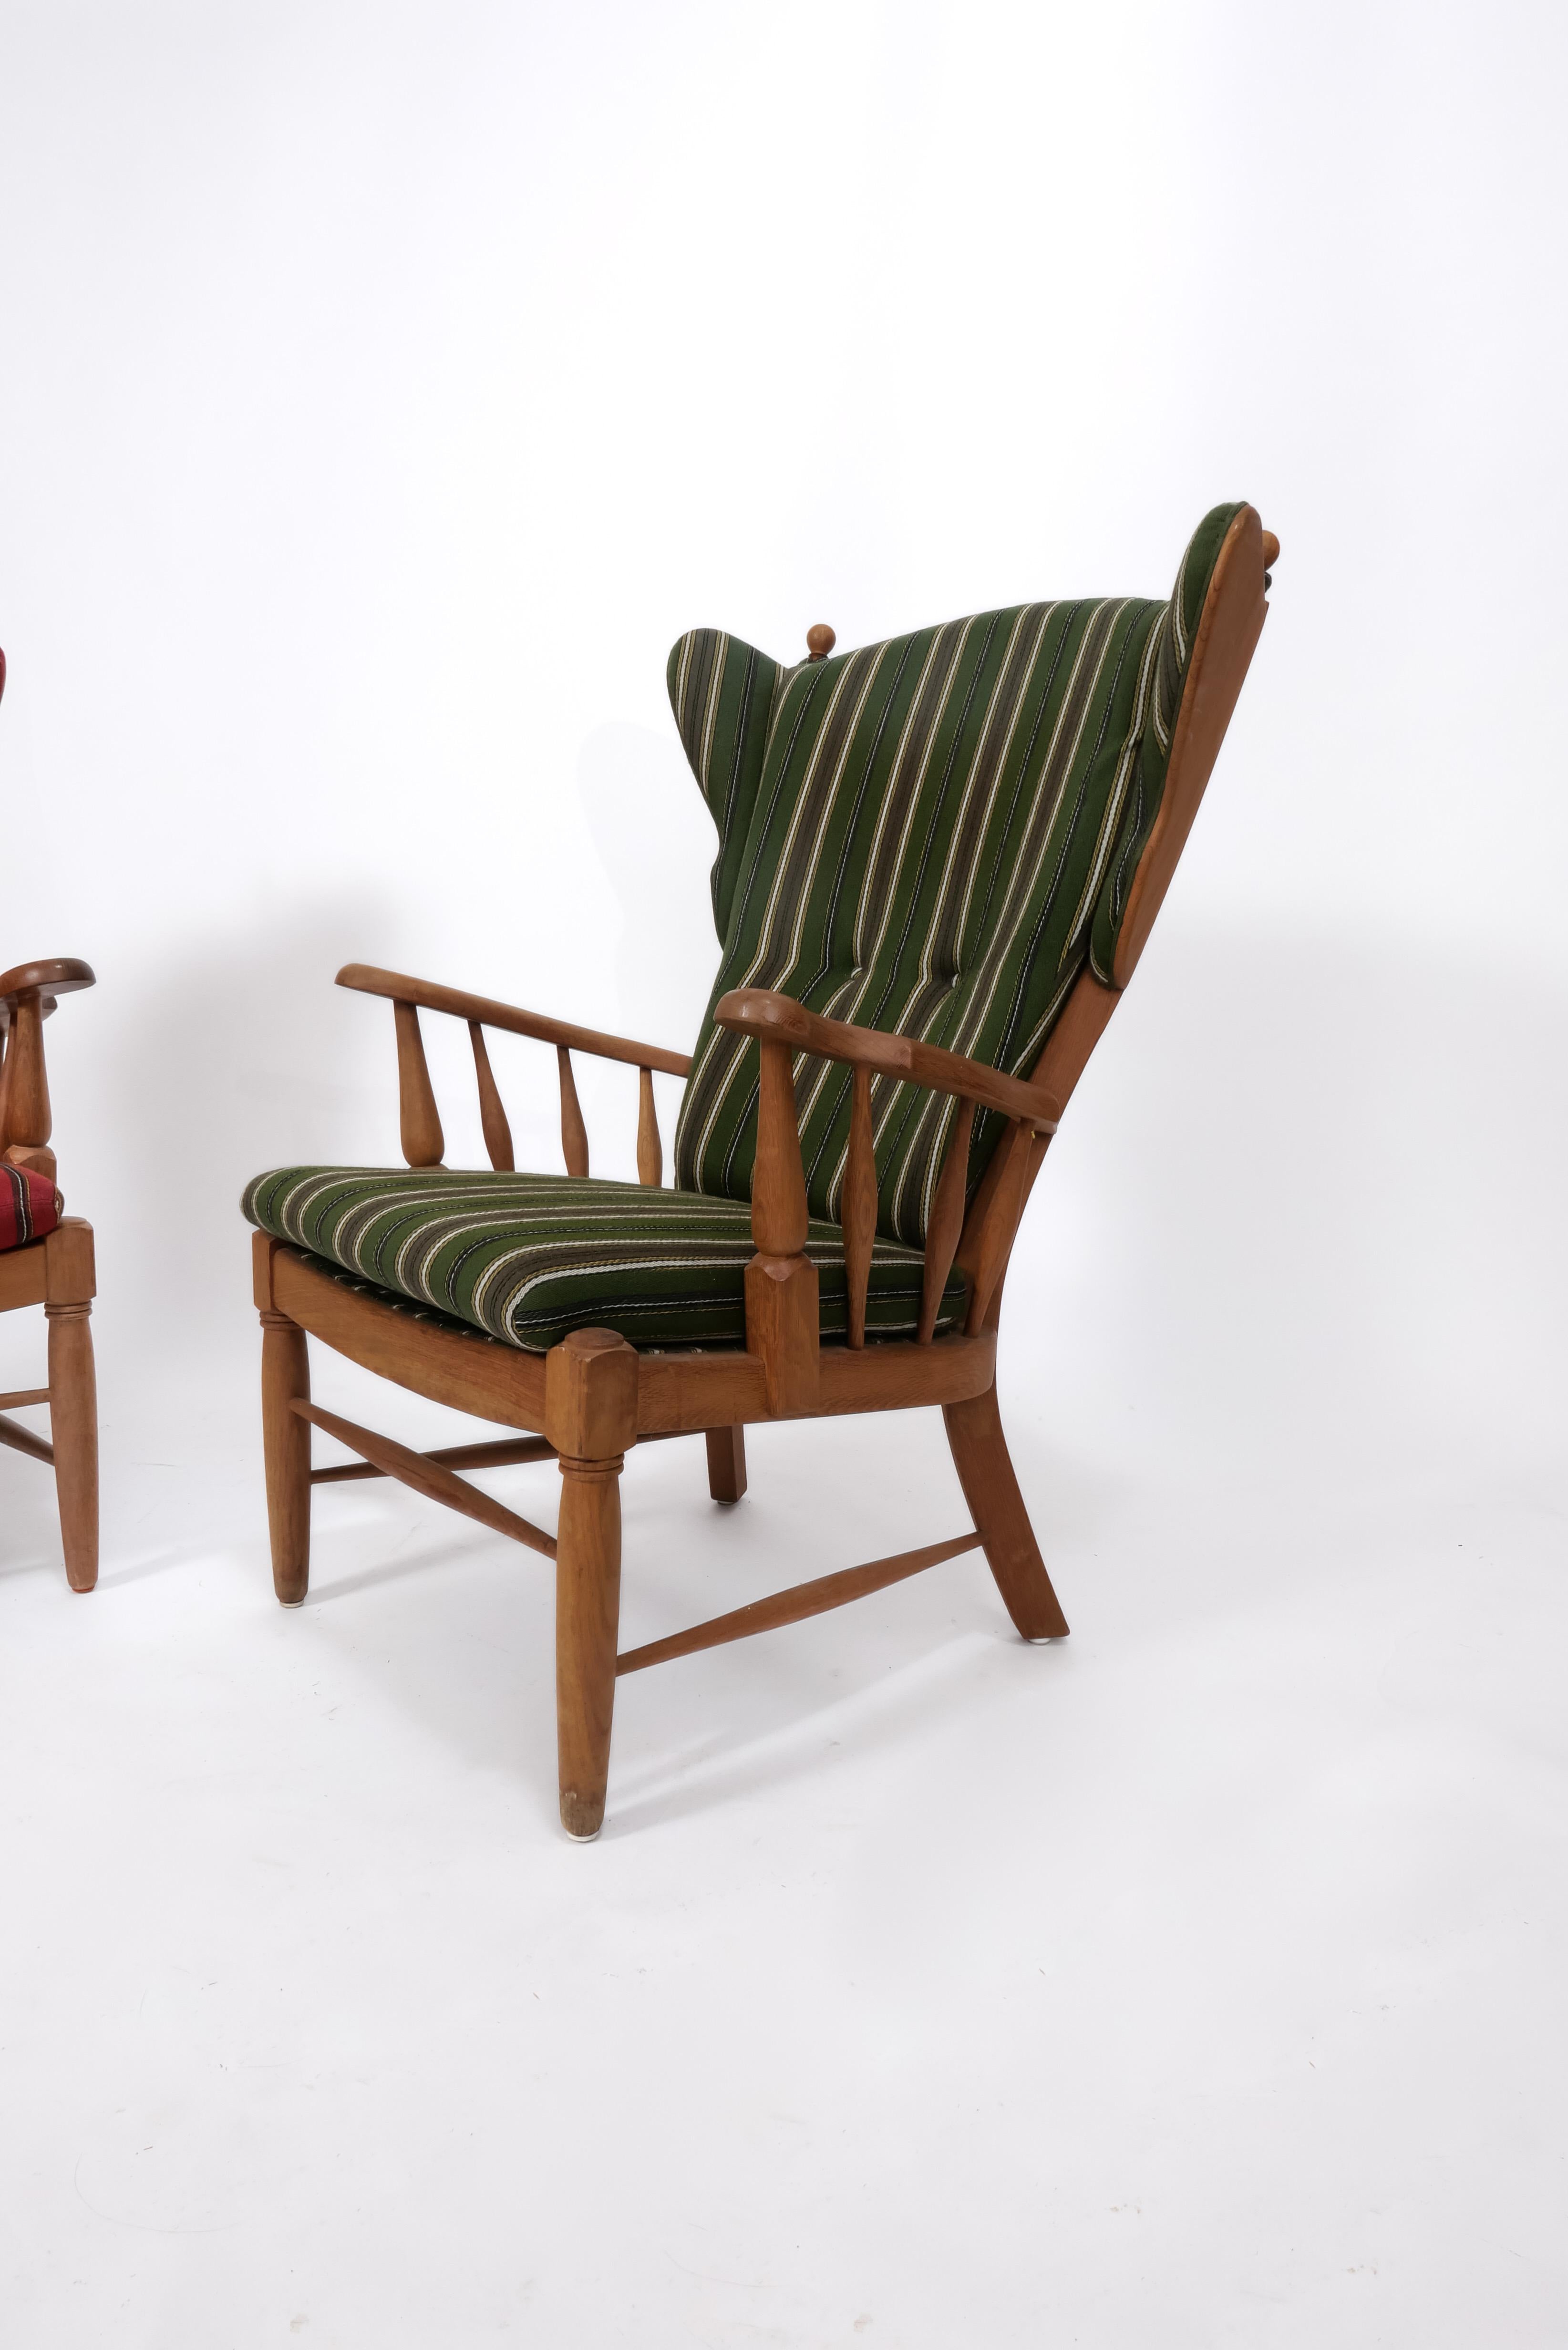 Unique pair of carved Oak lounge chairs, recently imported from Denmark. High backrests make these ultra comfortable for use as fireside chairs or in a sitting room. With whimsical detailing throughout, these chairs are statement-making. They are